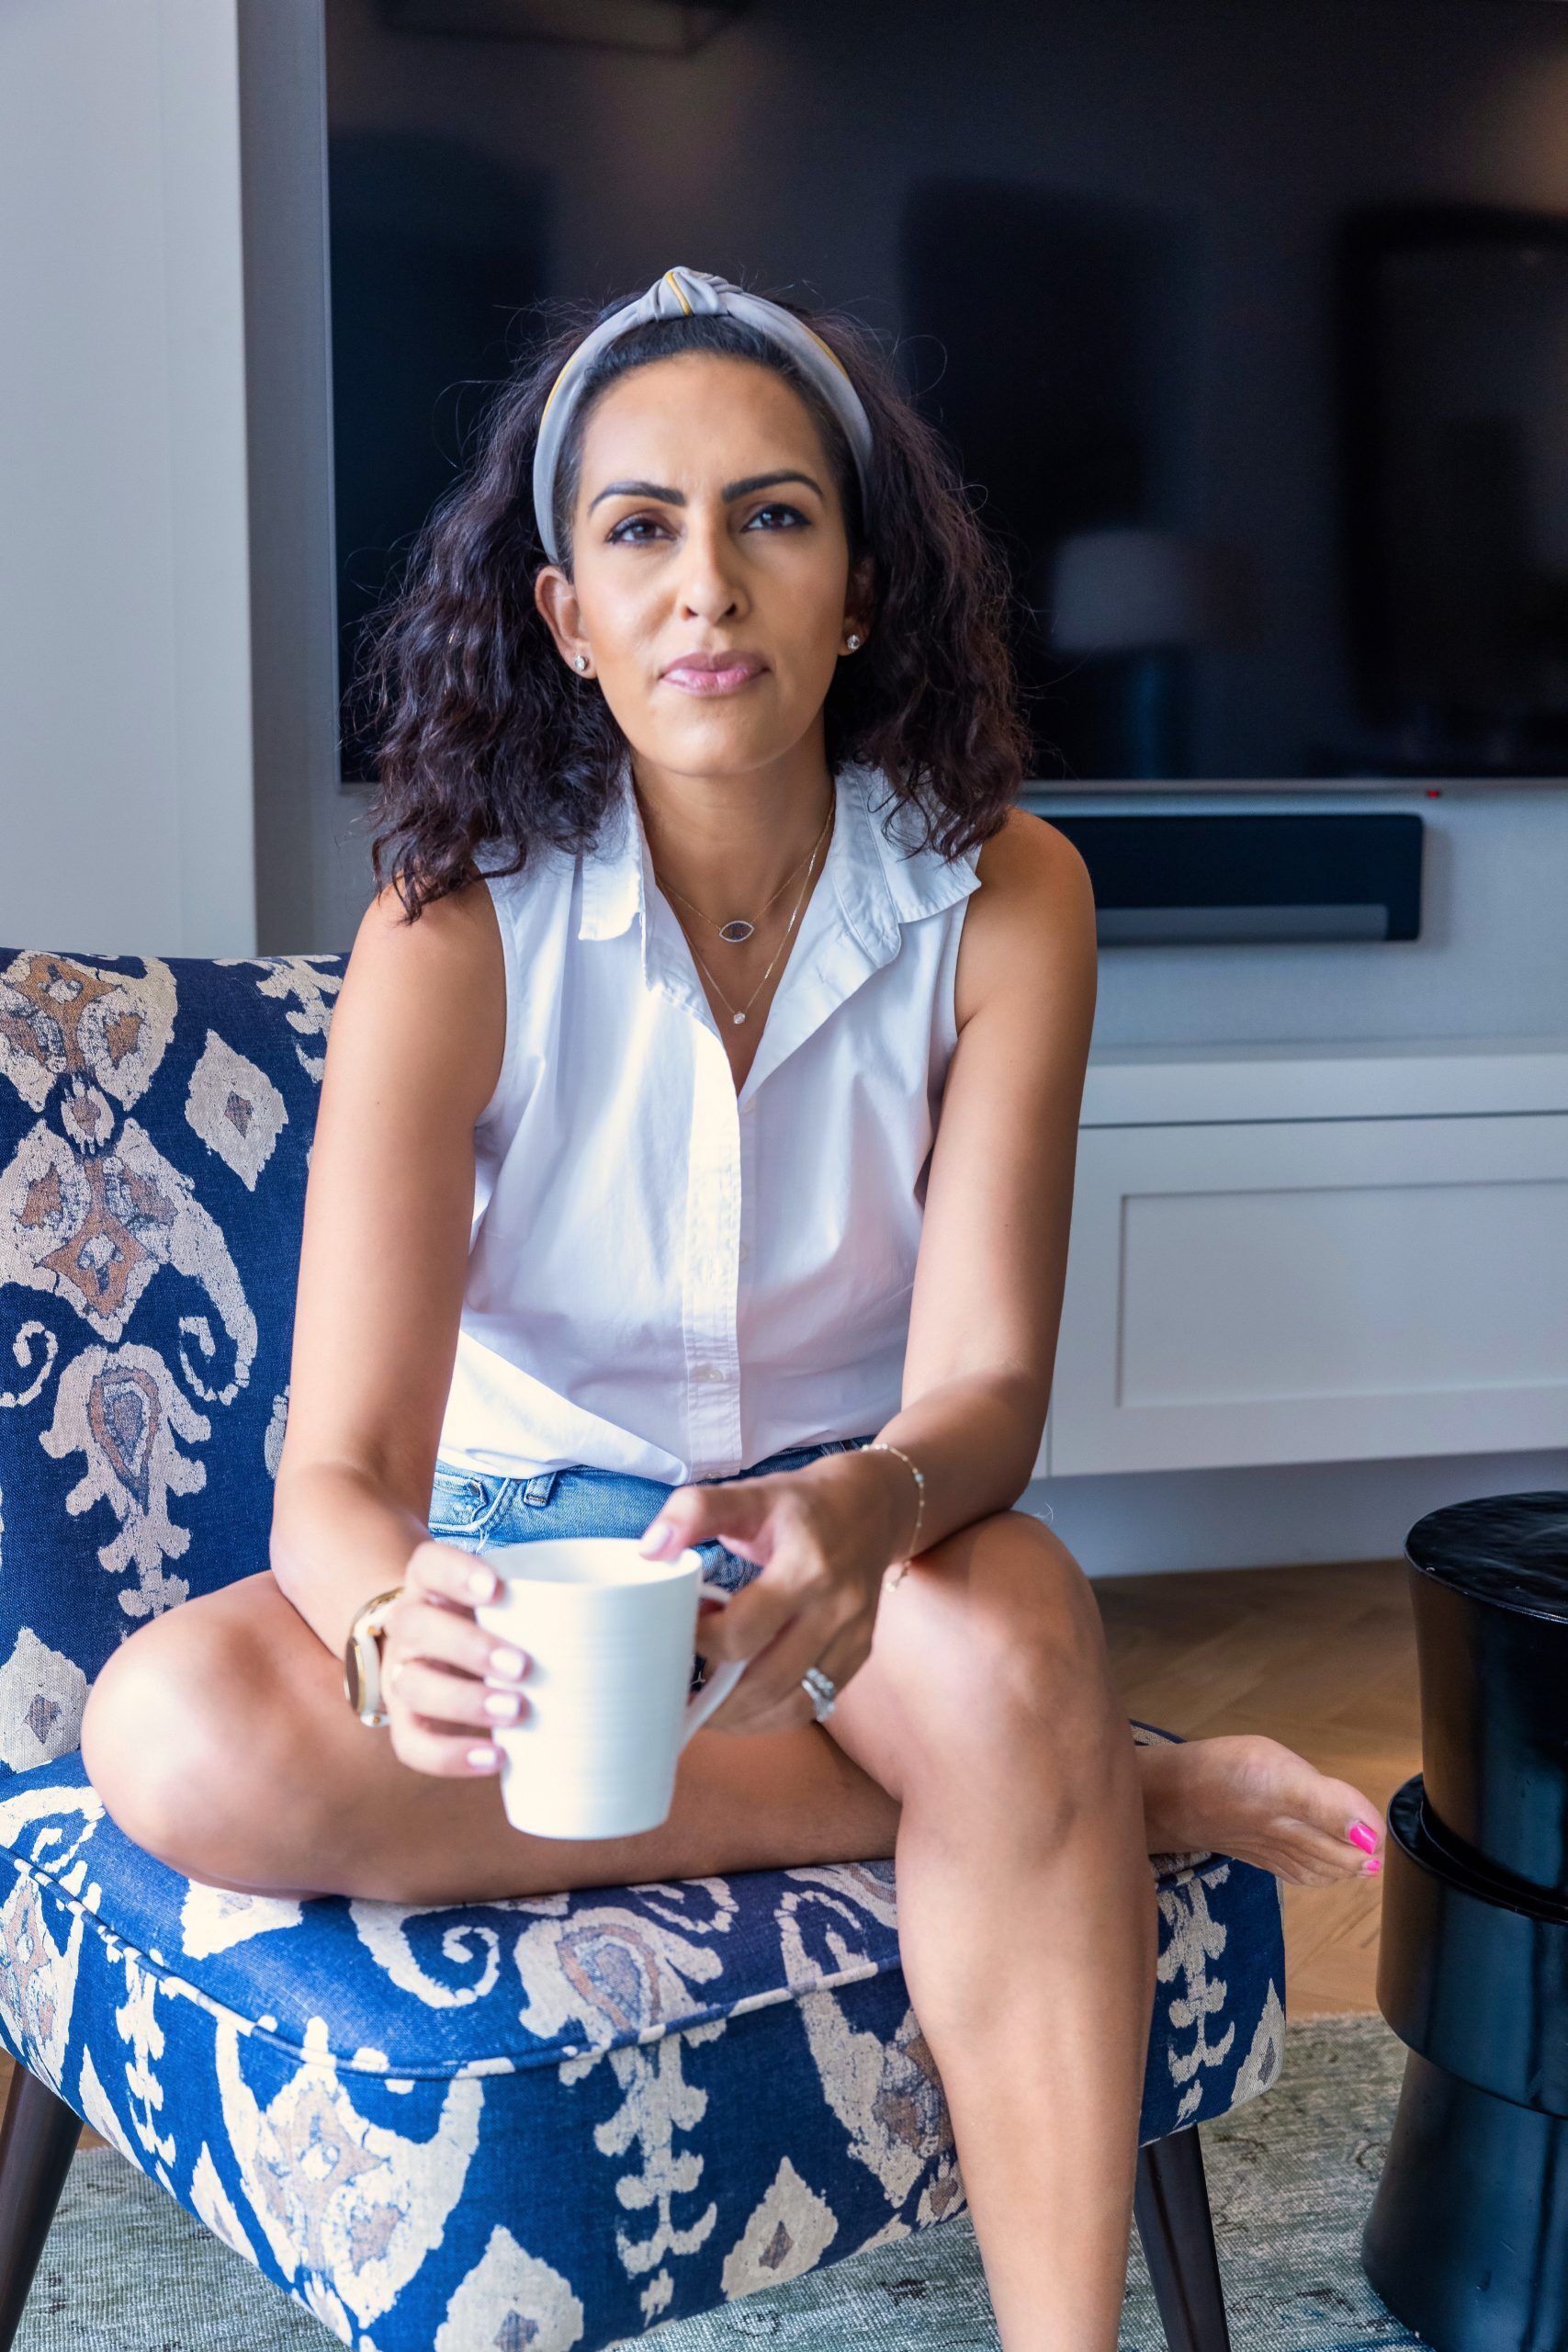 Ryani Rupani wearing a white shirt, sitting in a chair with a coffee mug, smiling at the camera.